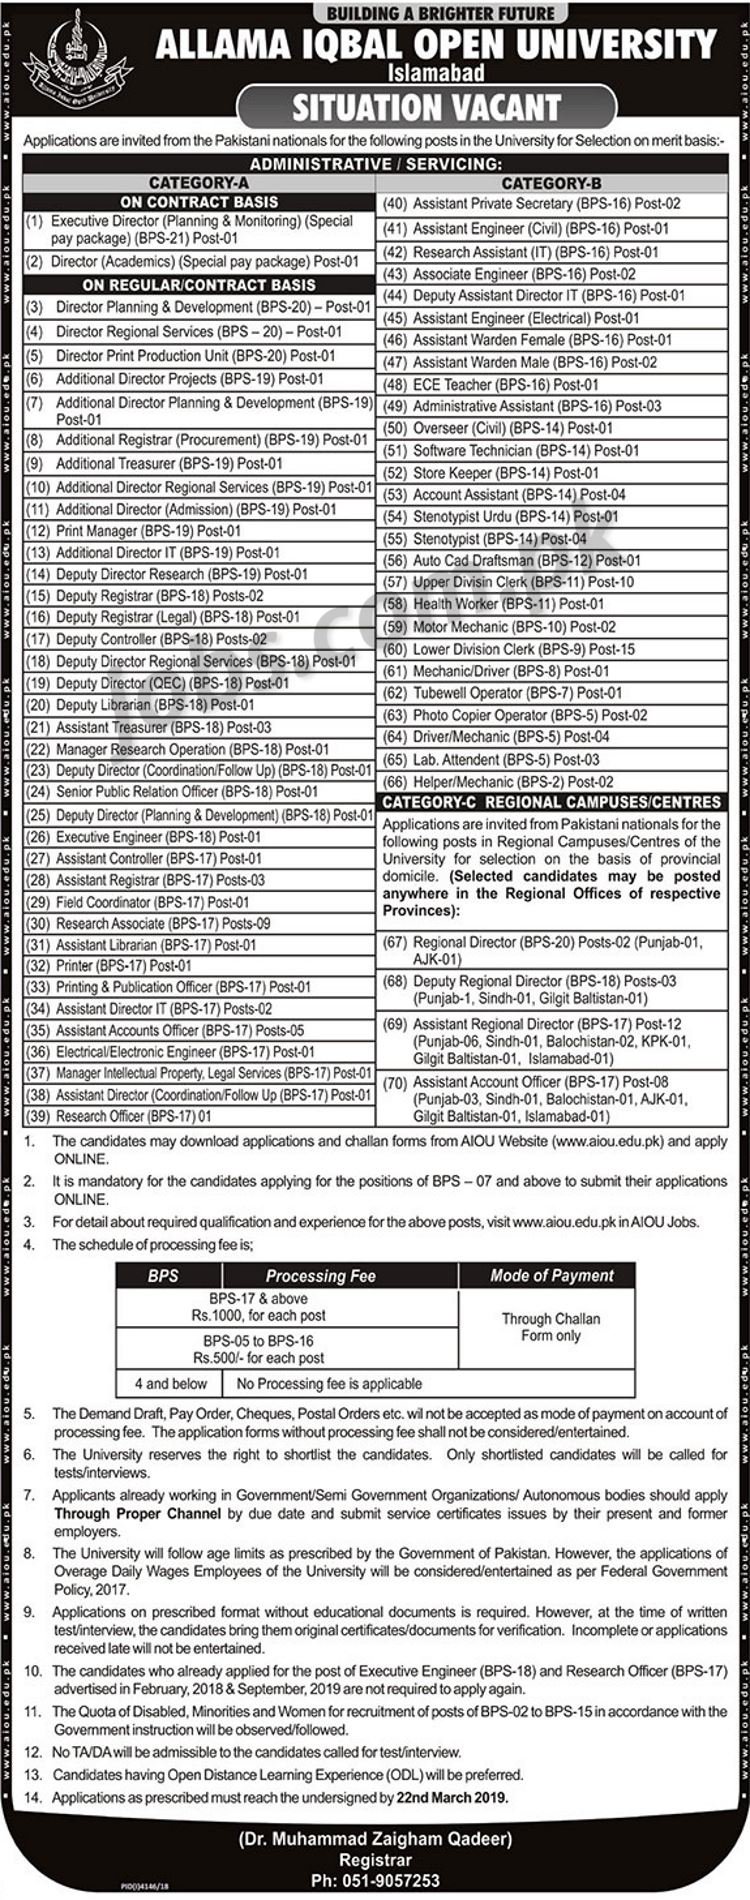 AIOU Jobs 2019 for 142+ Posts (Multiple Categories)